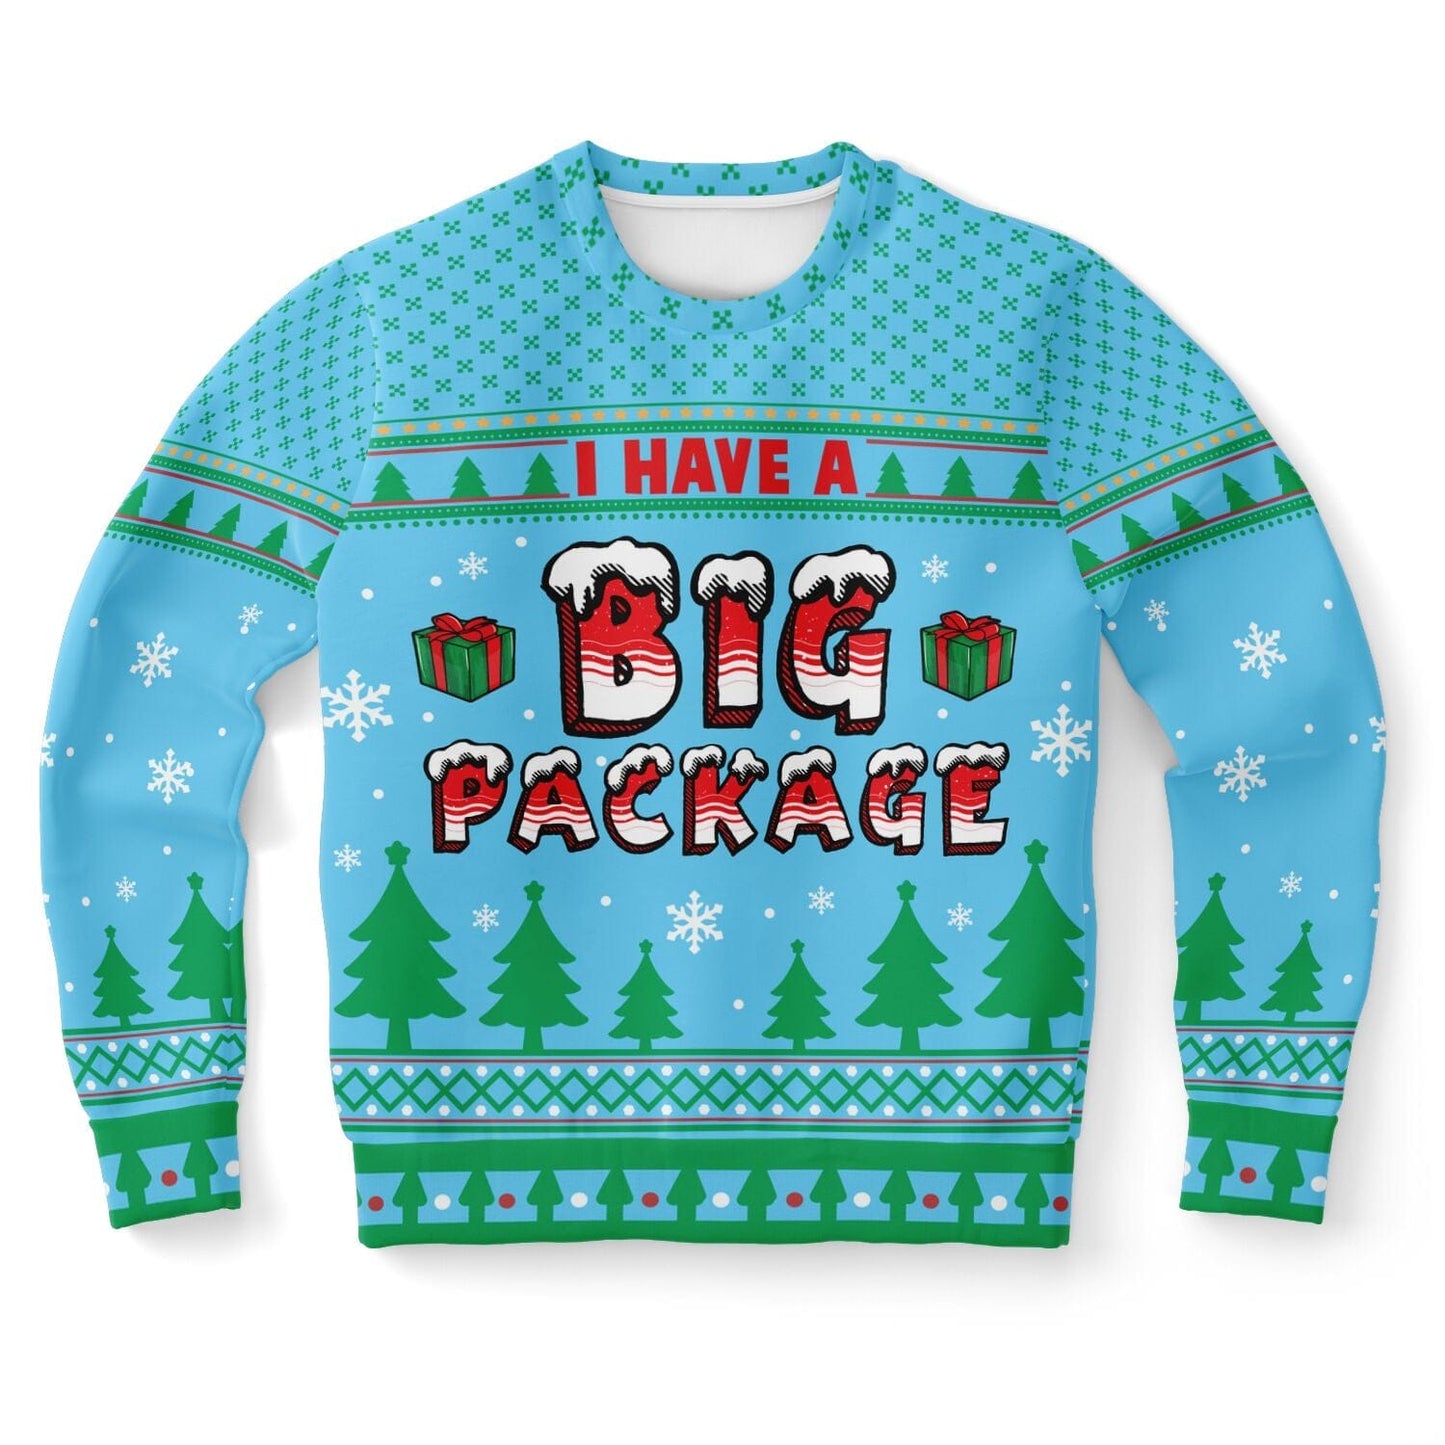 I Have a Big Package - Funny Offensive Ugly Christmas Sweater (Sweatshirt) XS